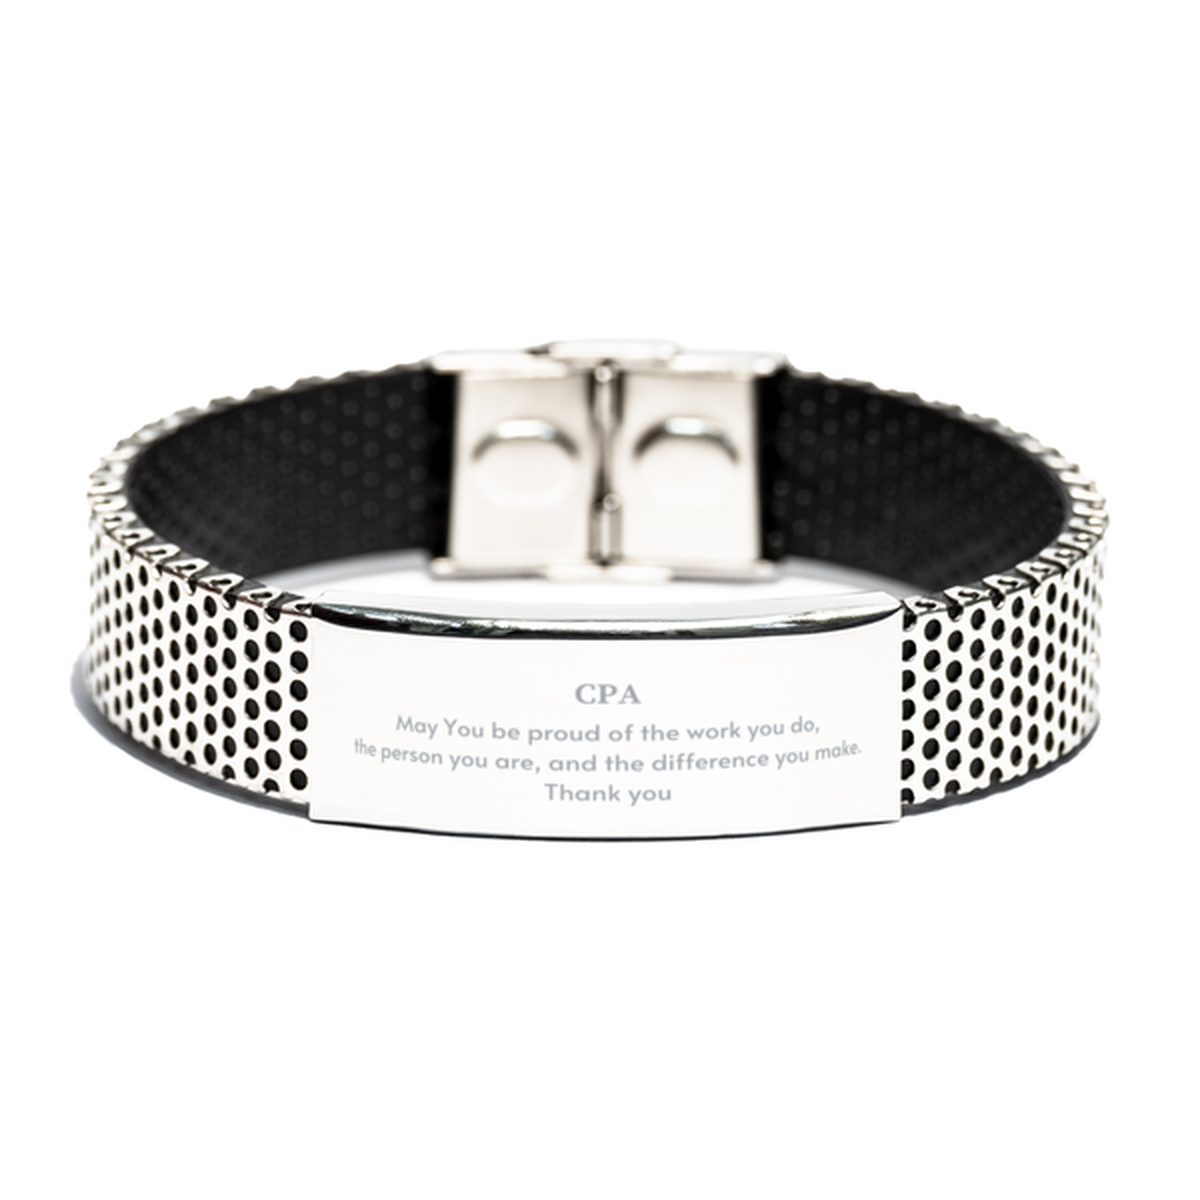 Heartwarming Stainless Steel Bracelet Retirement Coworkers Gifts for CPA, CPA May You be proud of the work you do, the person you are Gifts for Boss Men Women Friends